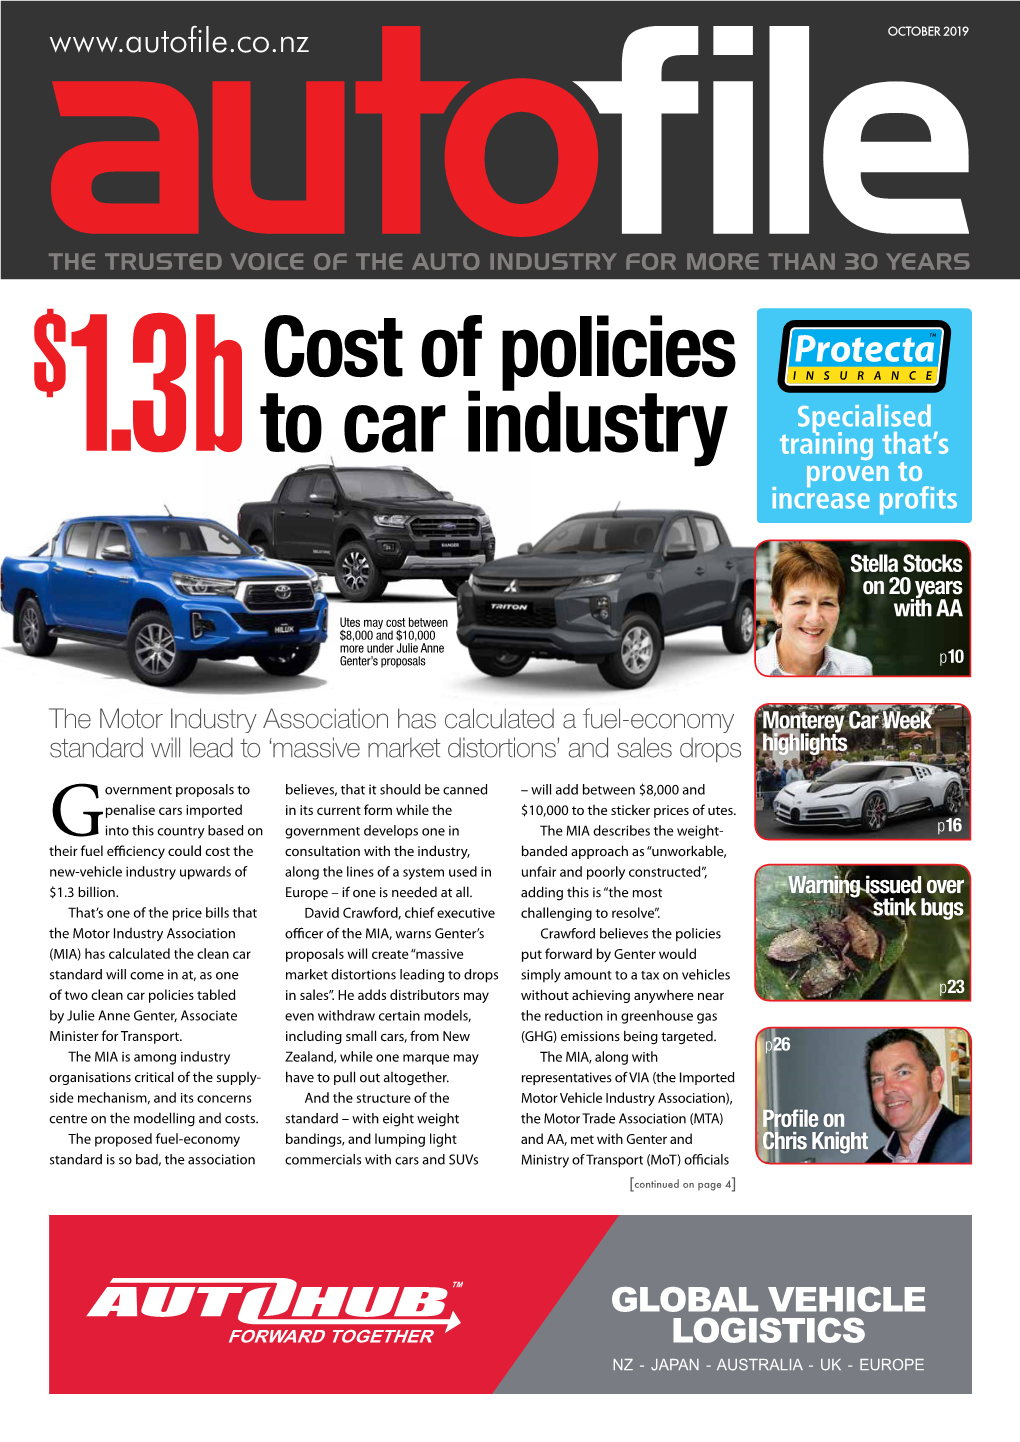 Cost of Policies to Car Industry